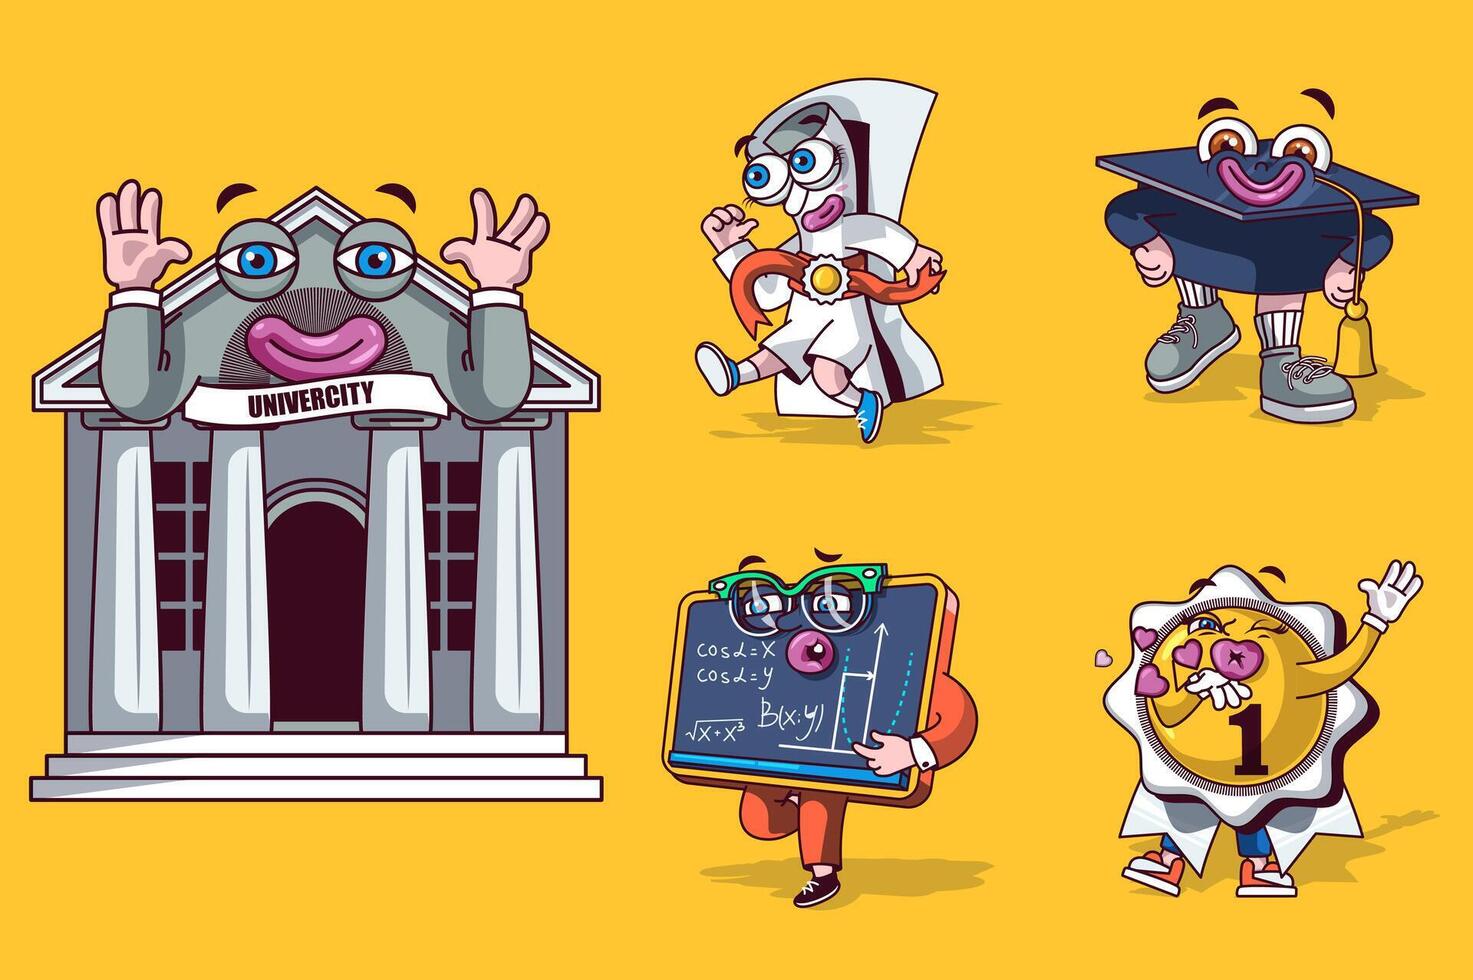 Study concept with 3d cute cartoon characters set. Funny avatars of university building, diploma certificate, graduation cap, blackboard, medal first win. Vector illustration with comic mascots design